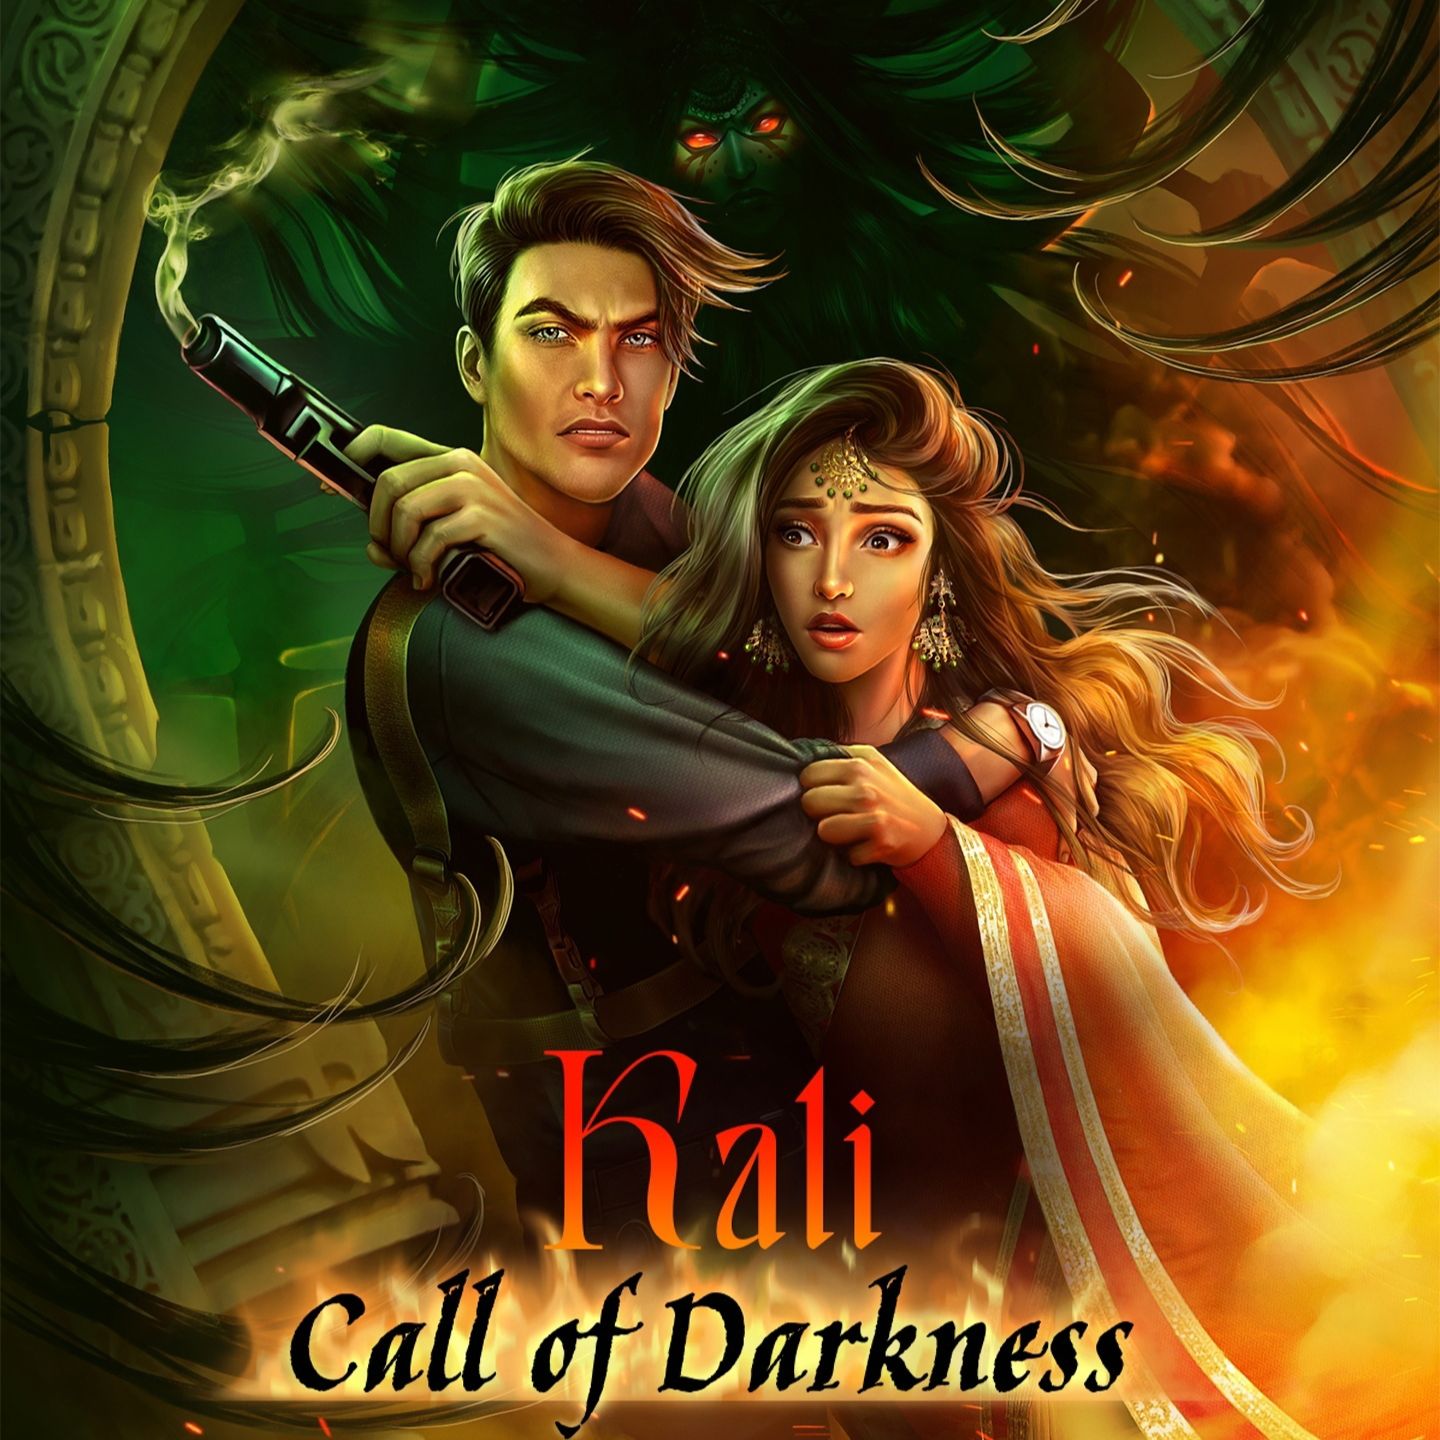 Budata Your Story Interactive - Kali - Sex1